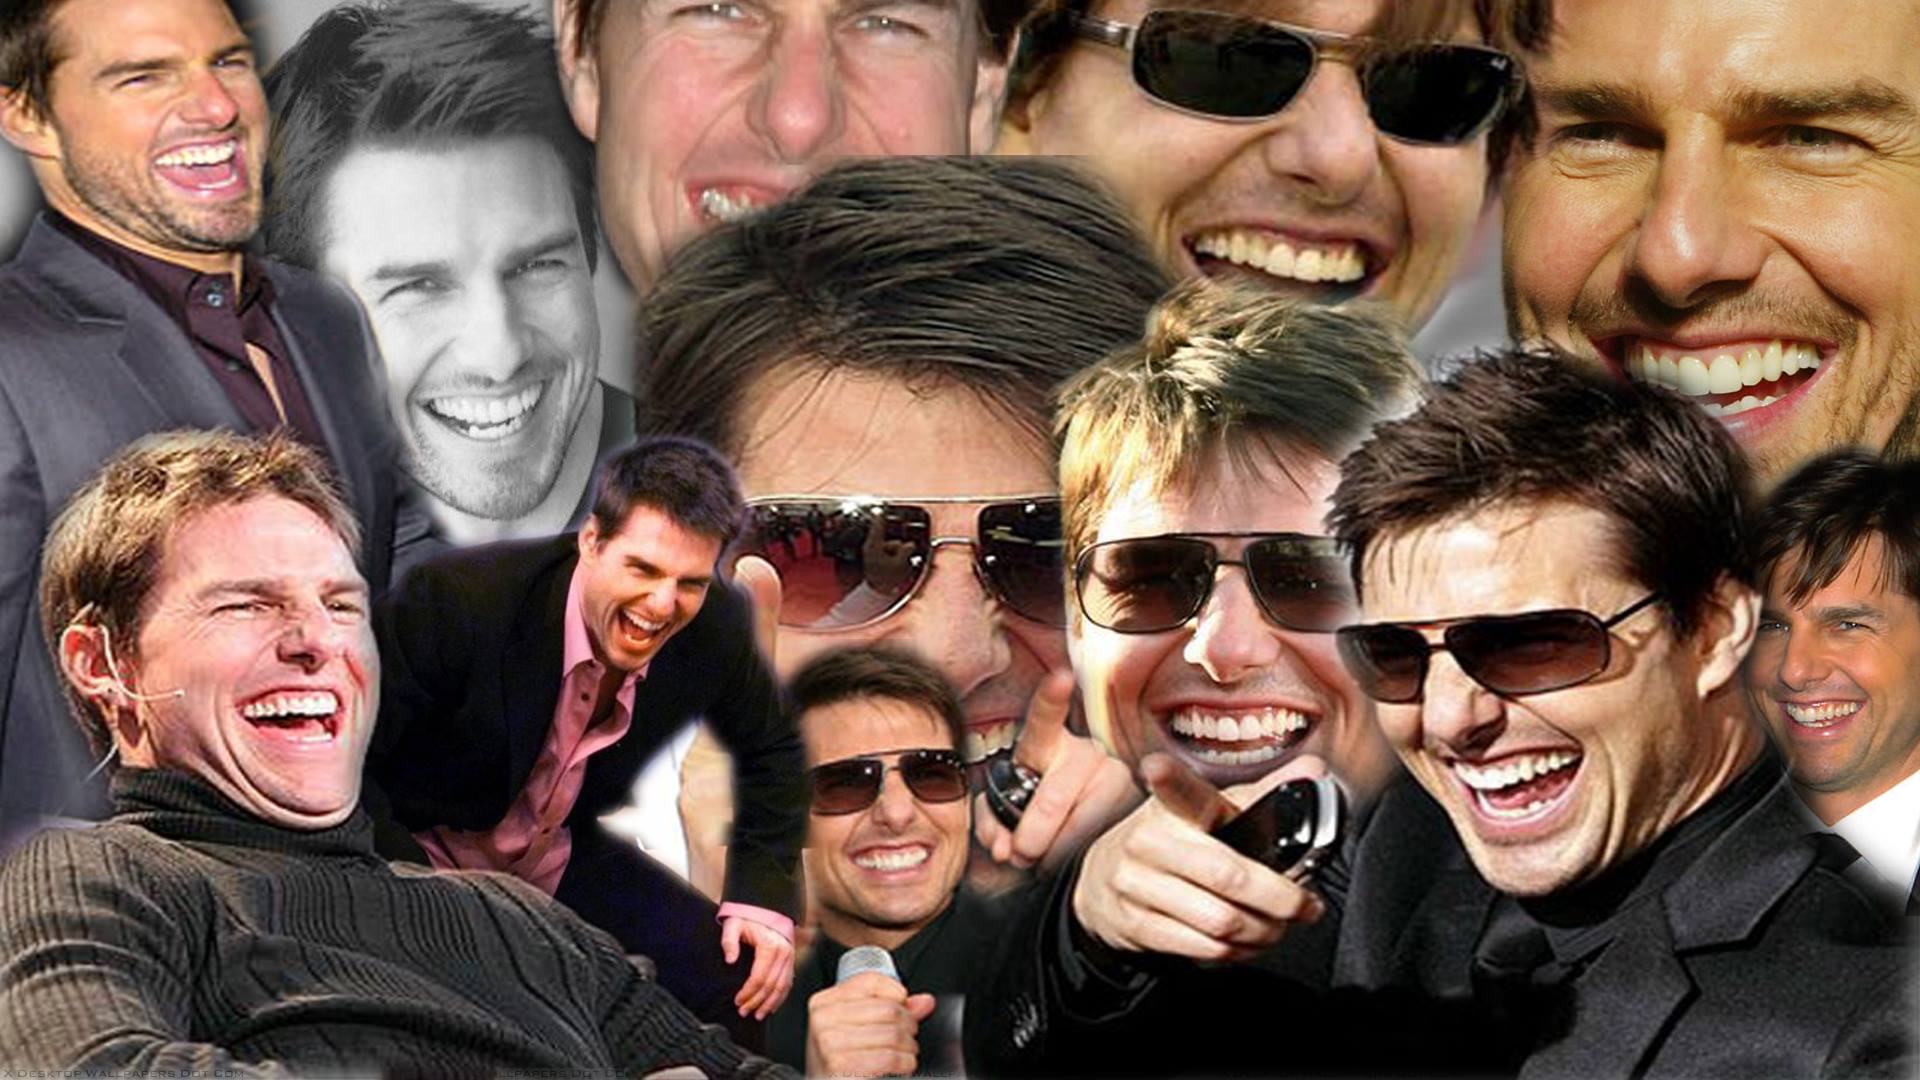 Crazy Tom Cruise Laughing HD Wallpaper 1920x1080 ID55130